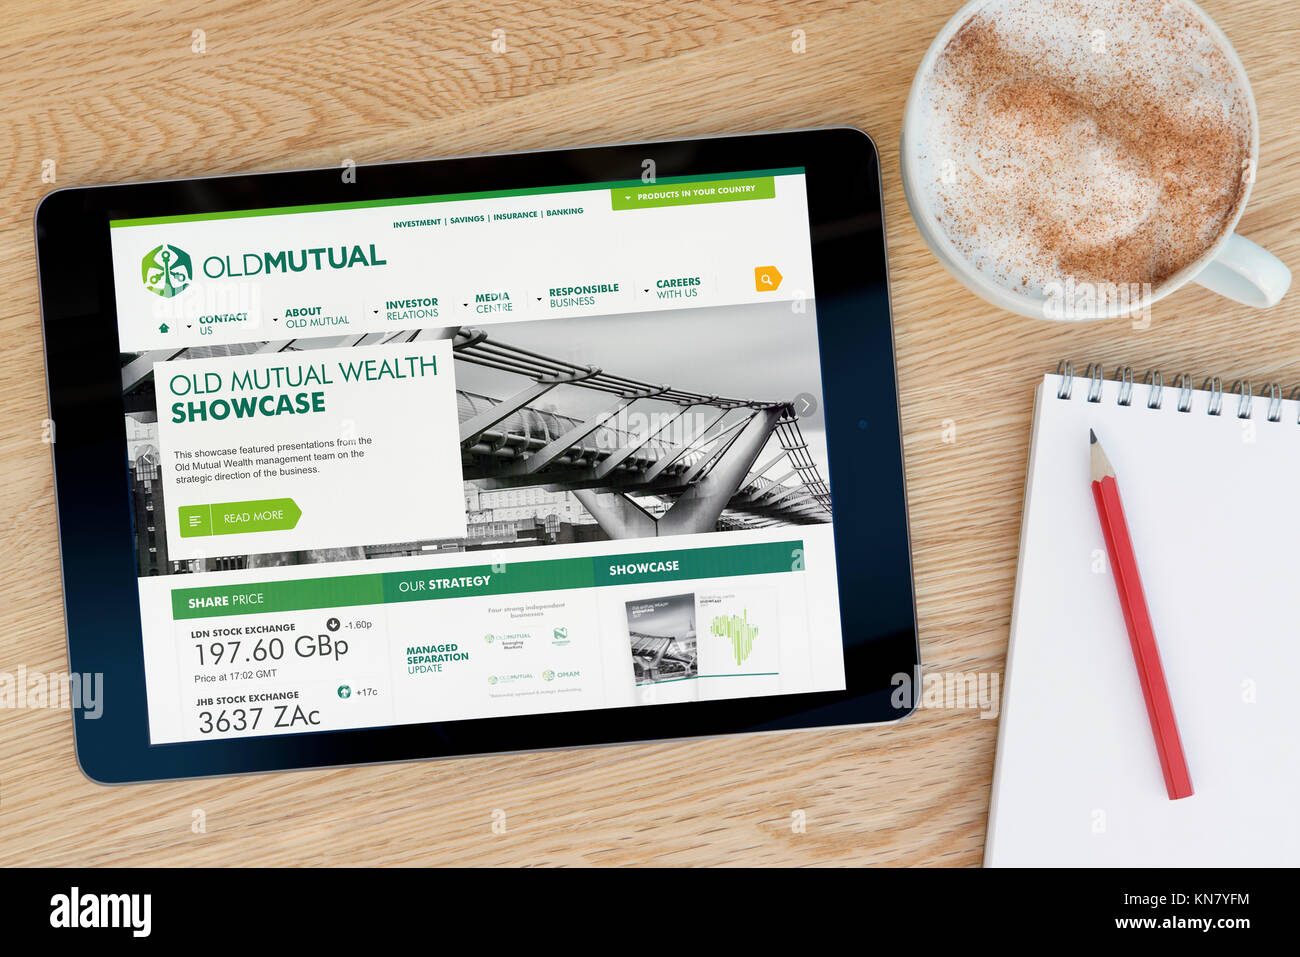 The Old Mutual website on an iPad tablet device which rests on a wooden table beside a notepad and pencil and a cup of coffee (Editorial only) Stock Photo